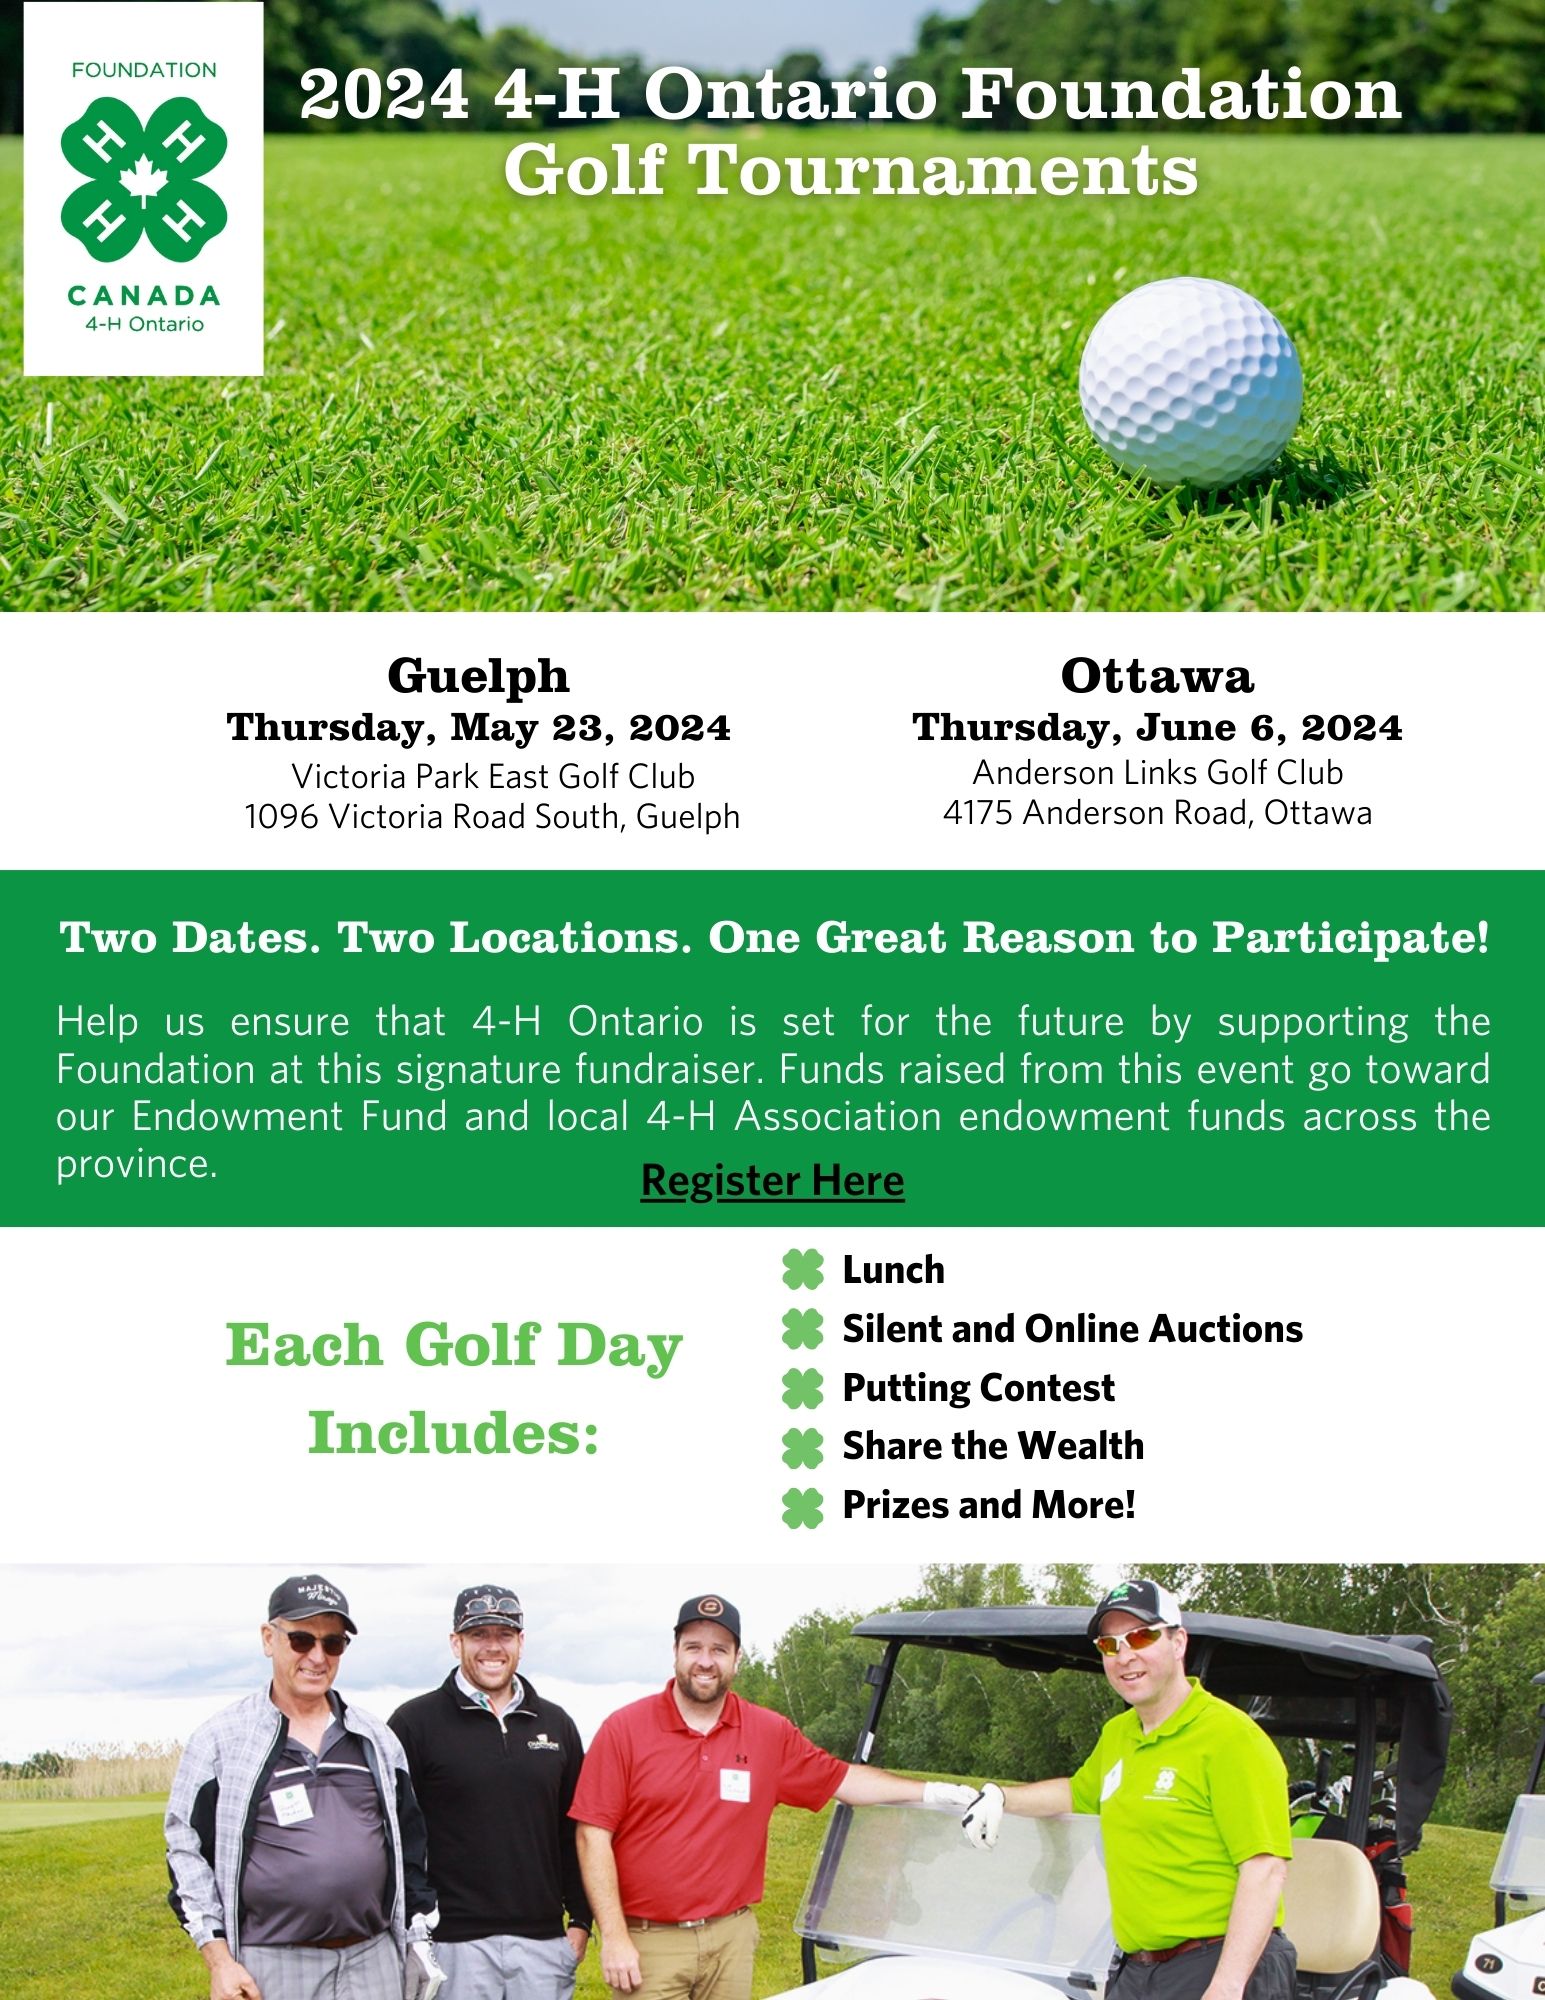 Front page of 2024 4-H Ontario Foundation Golf Flyer